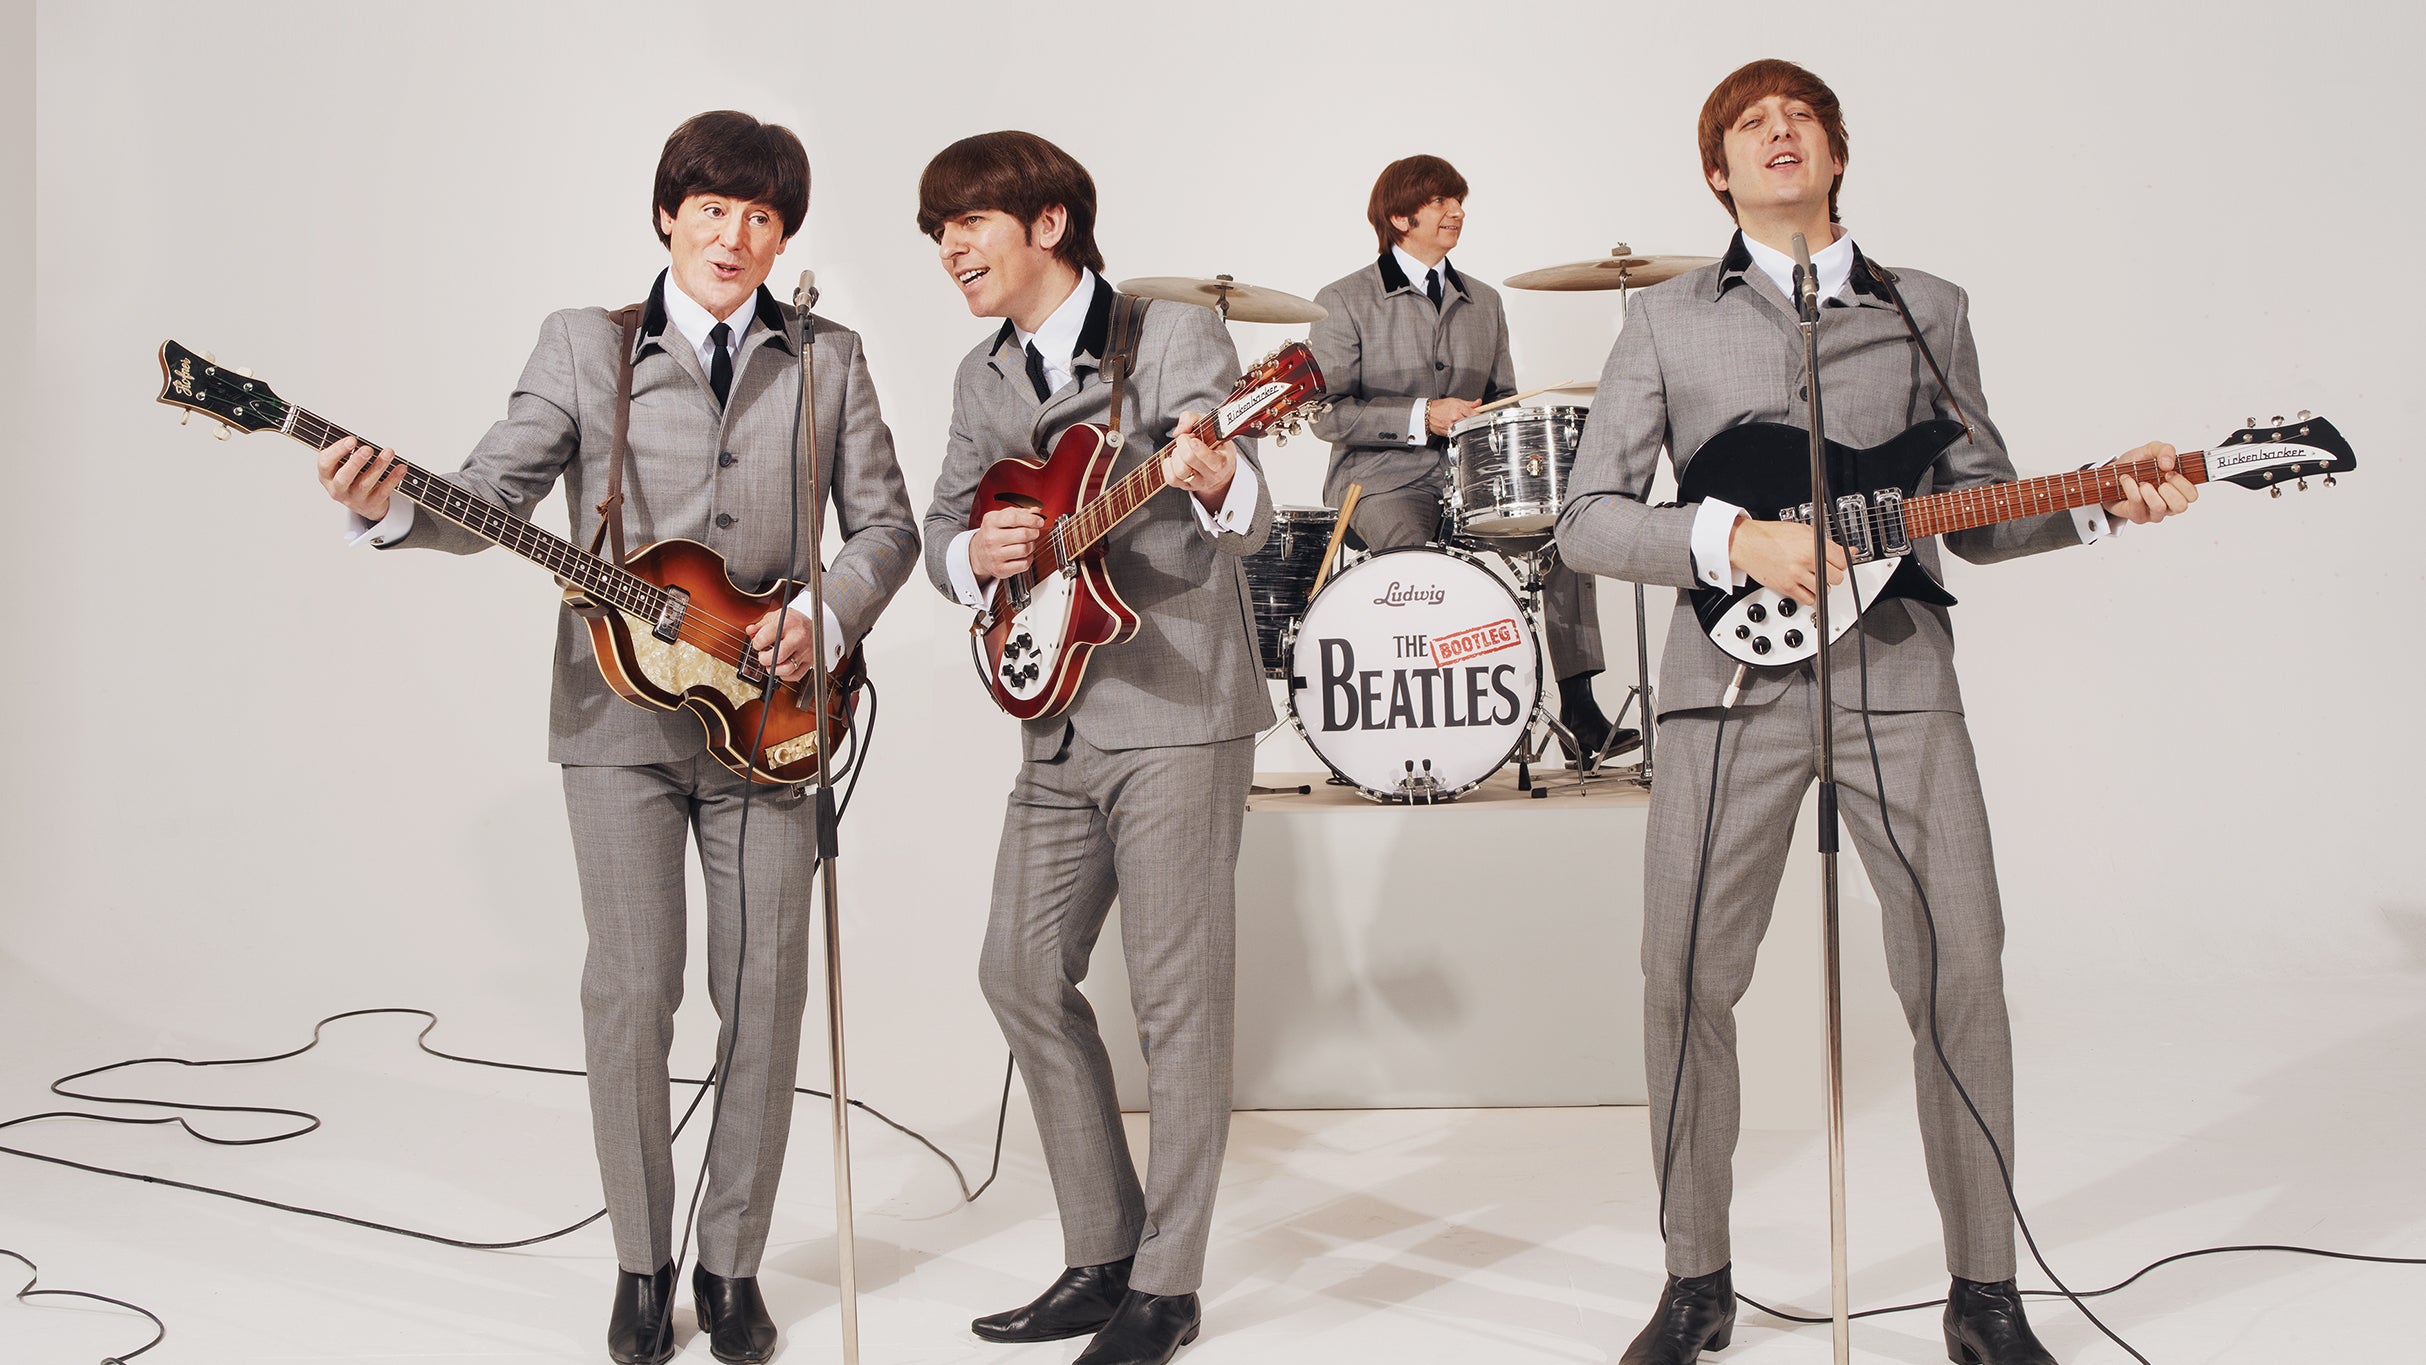 Image used with permission from Ticketmaster | The Bootleg Beatles 2023 New Zealand Tour tickets